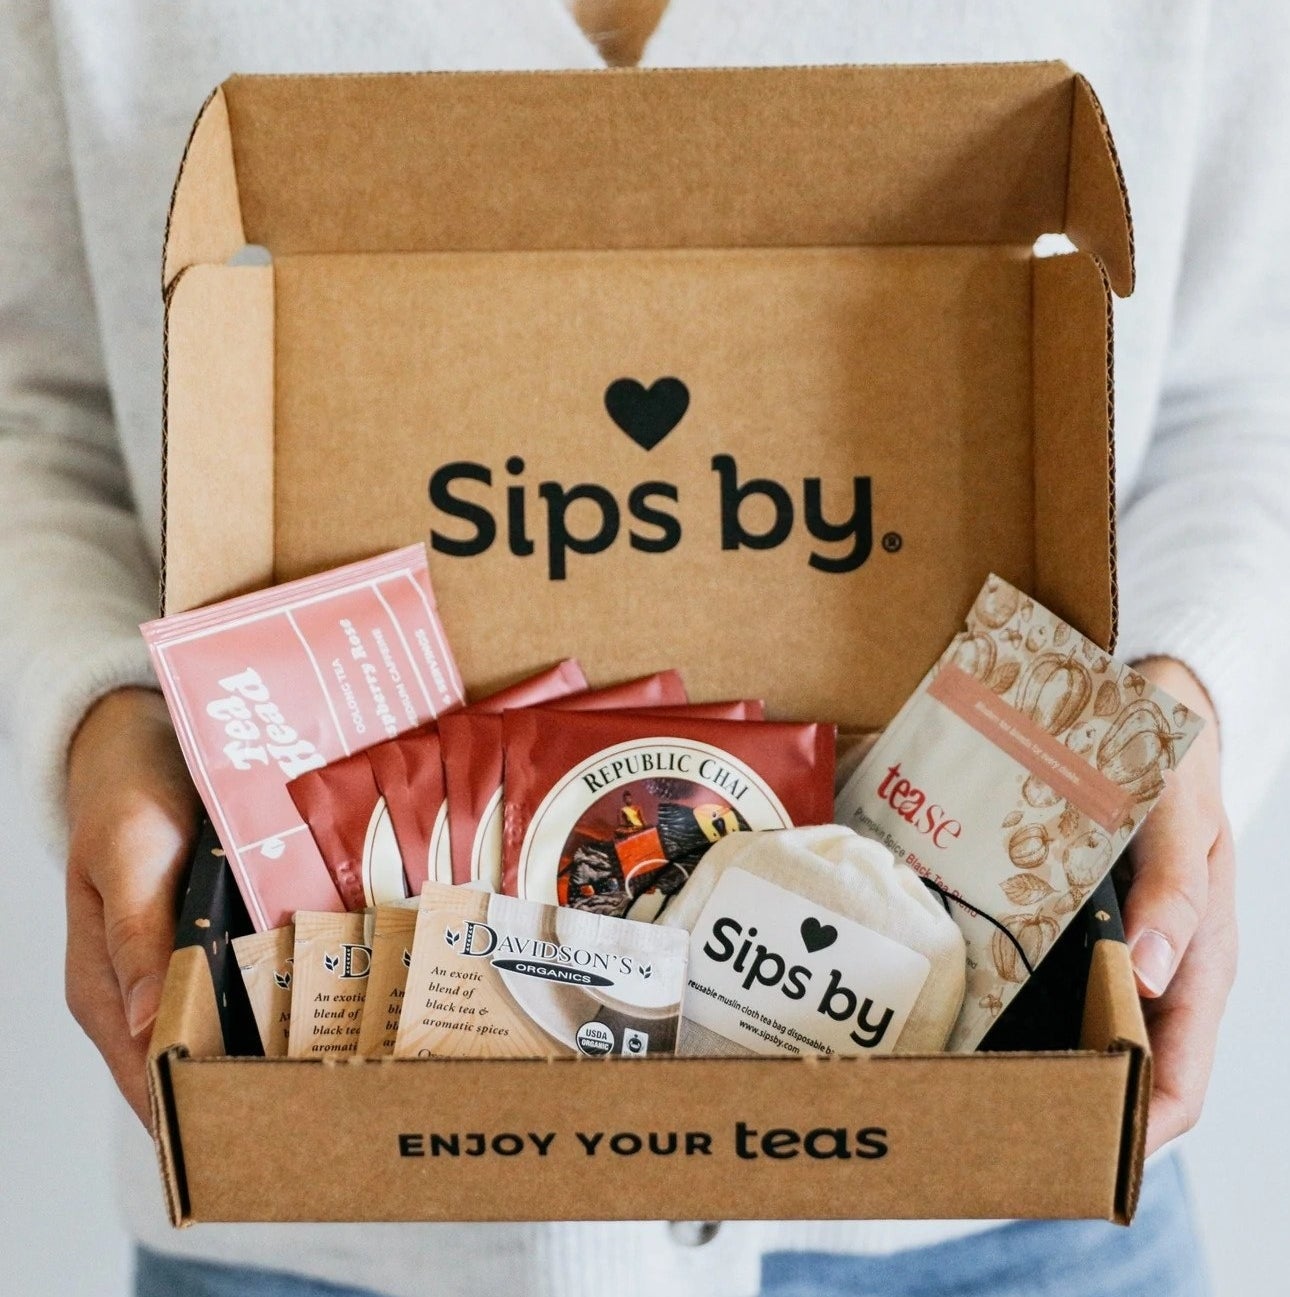 a model holding an open Sips by box filled with different tea bags